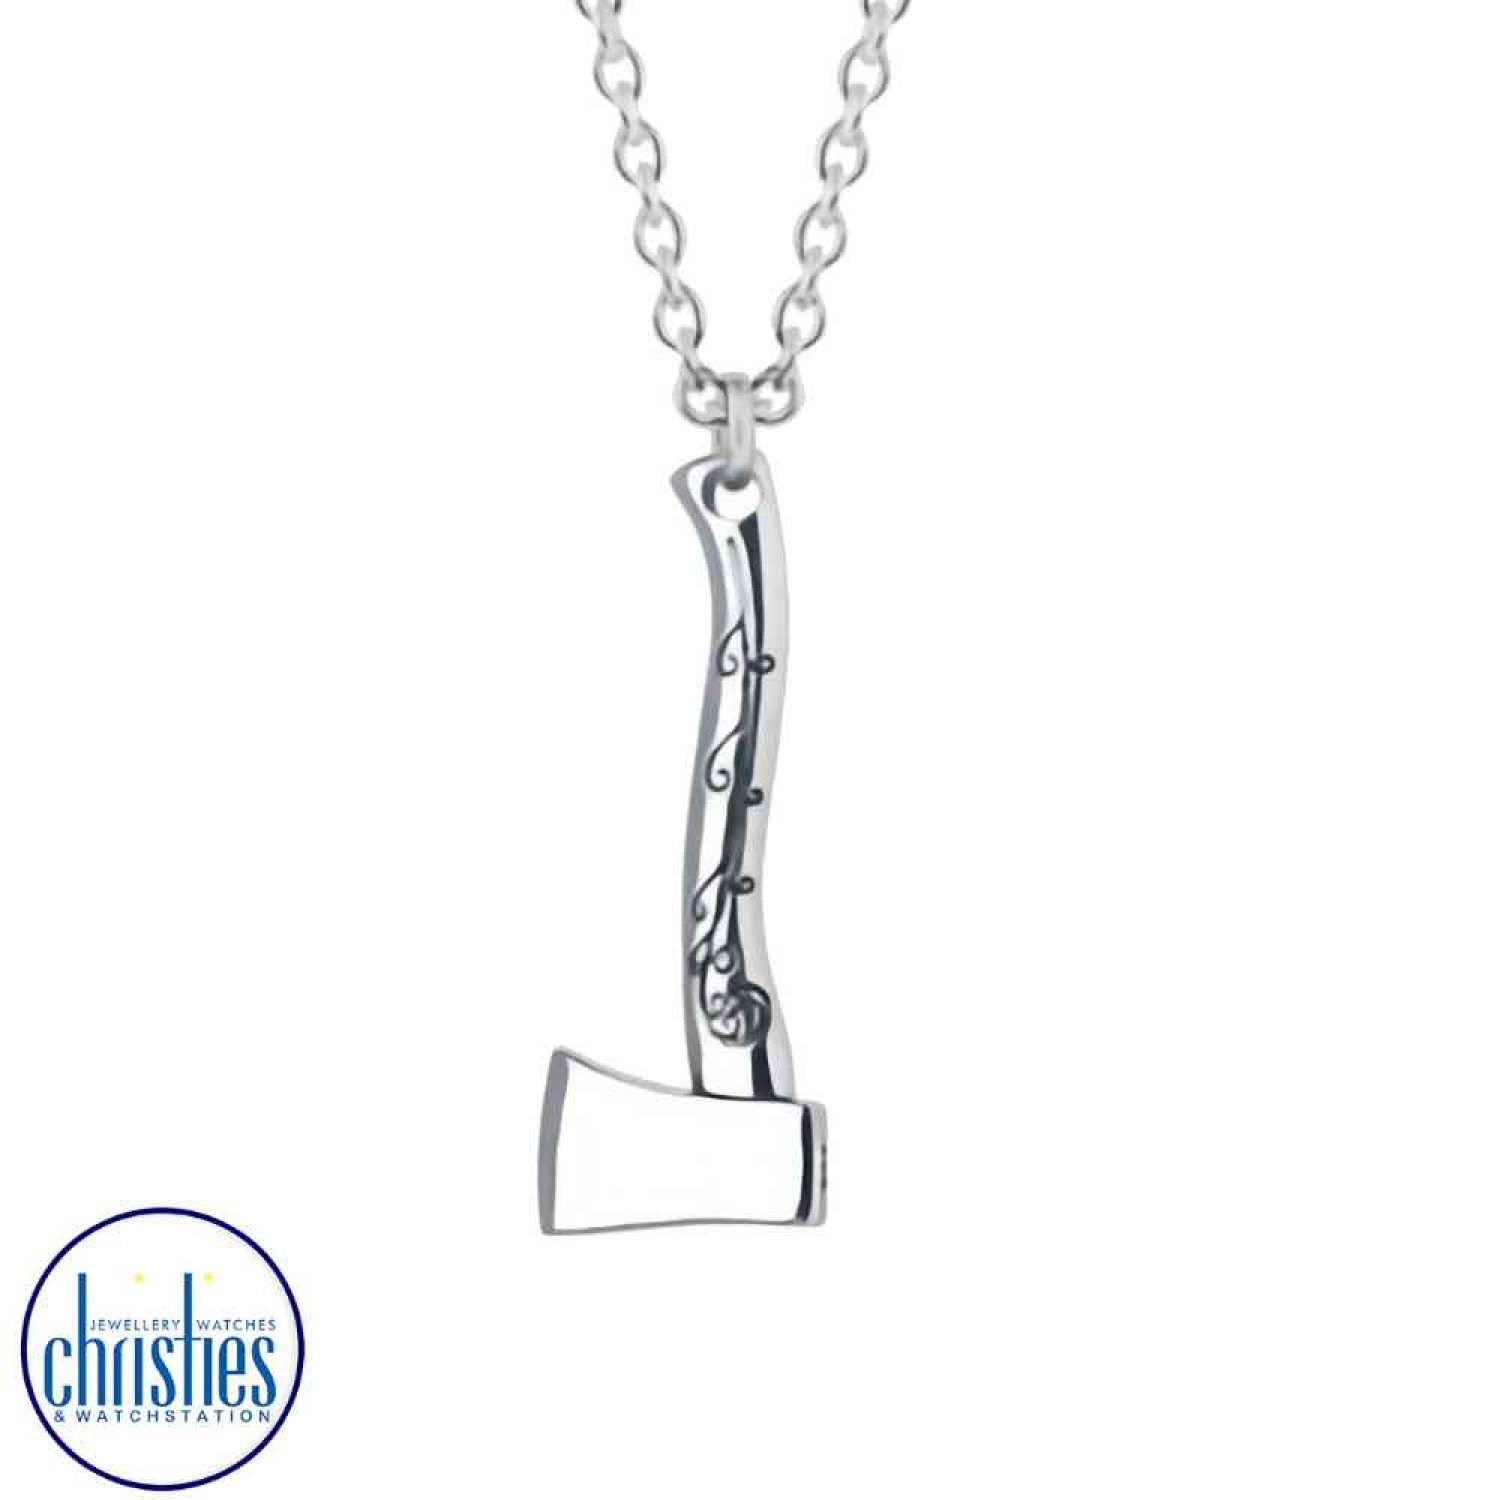 Farming Jewellery Silver Axe Necklace. Celebrated as a country with more sheep than people, New Zealand is known globally for its sheep farming. horseshoe jewellery nz